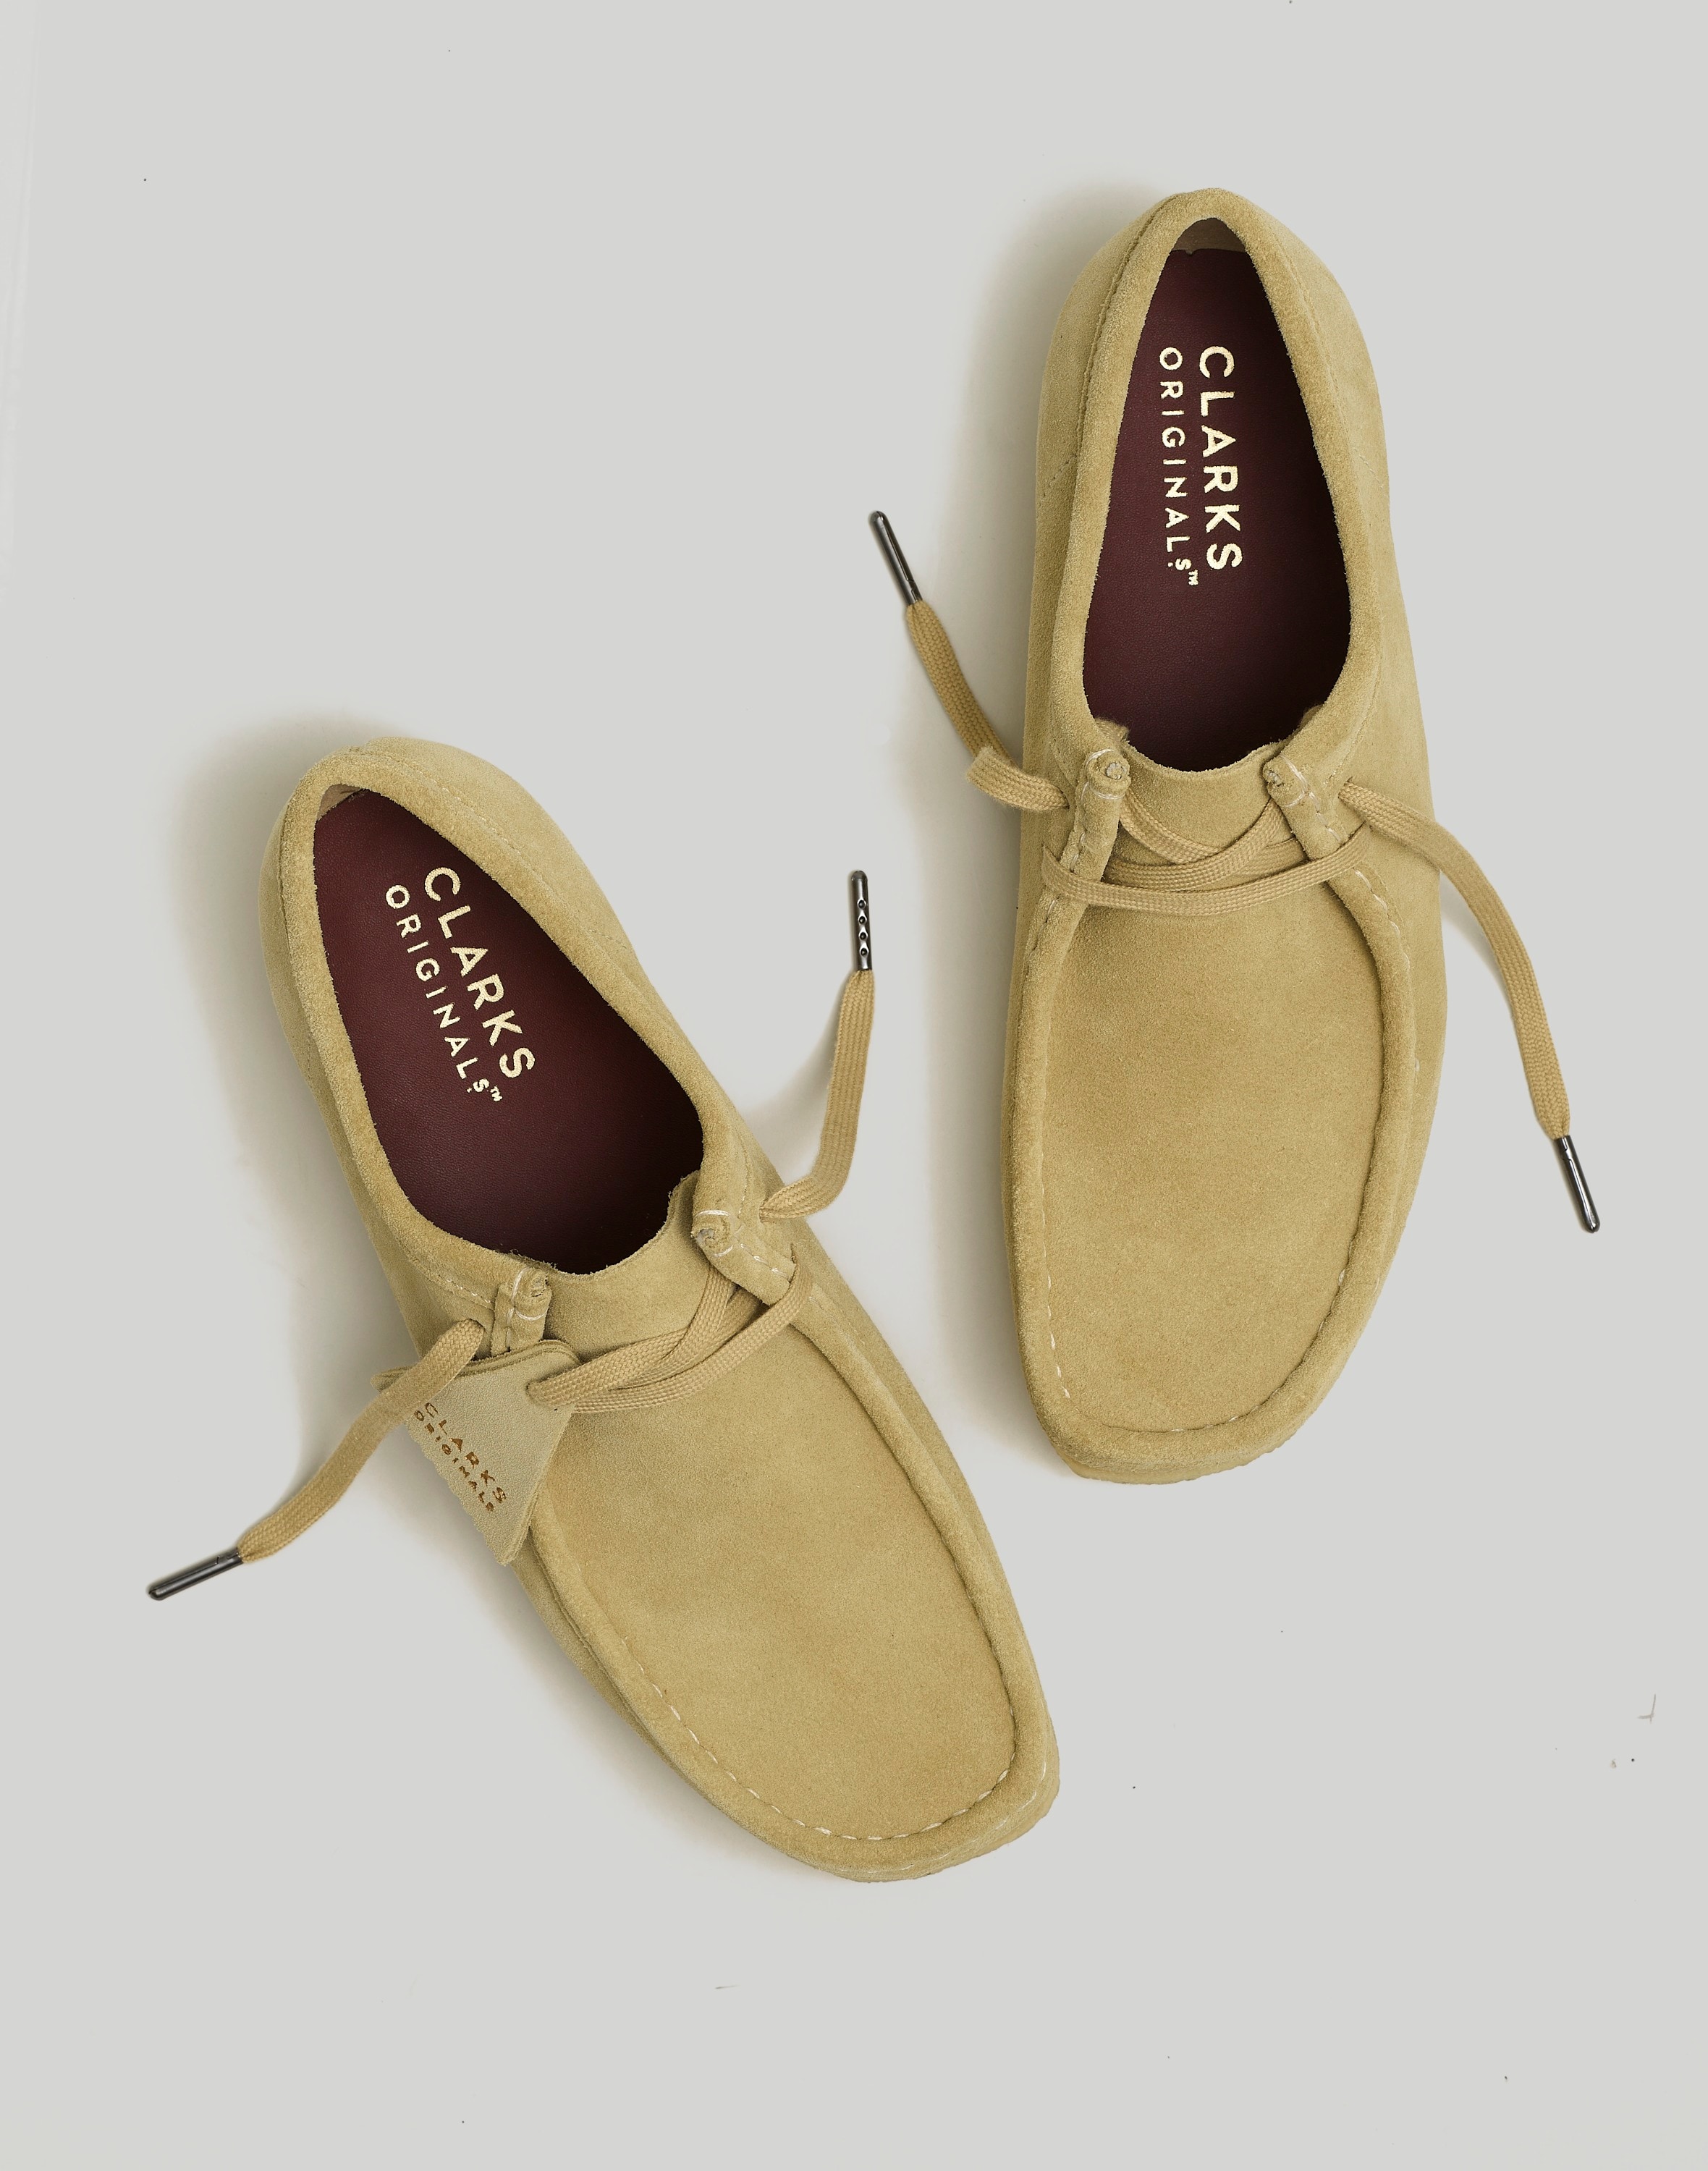 Clarks® Suede Wallabee Shoes